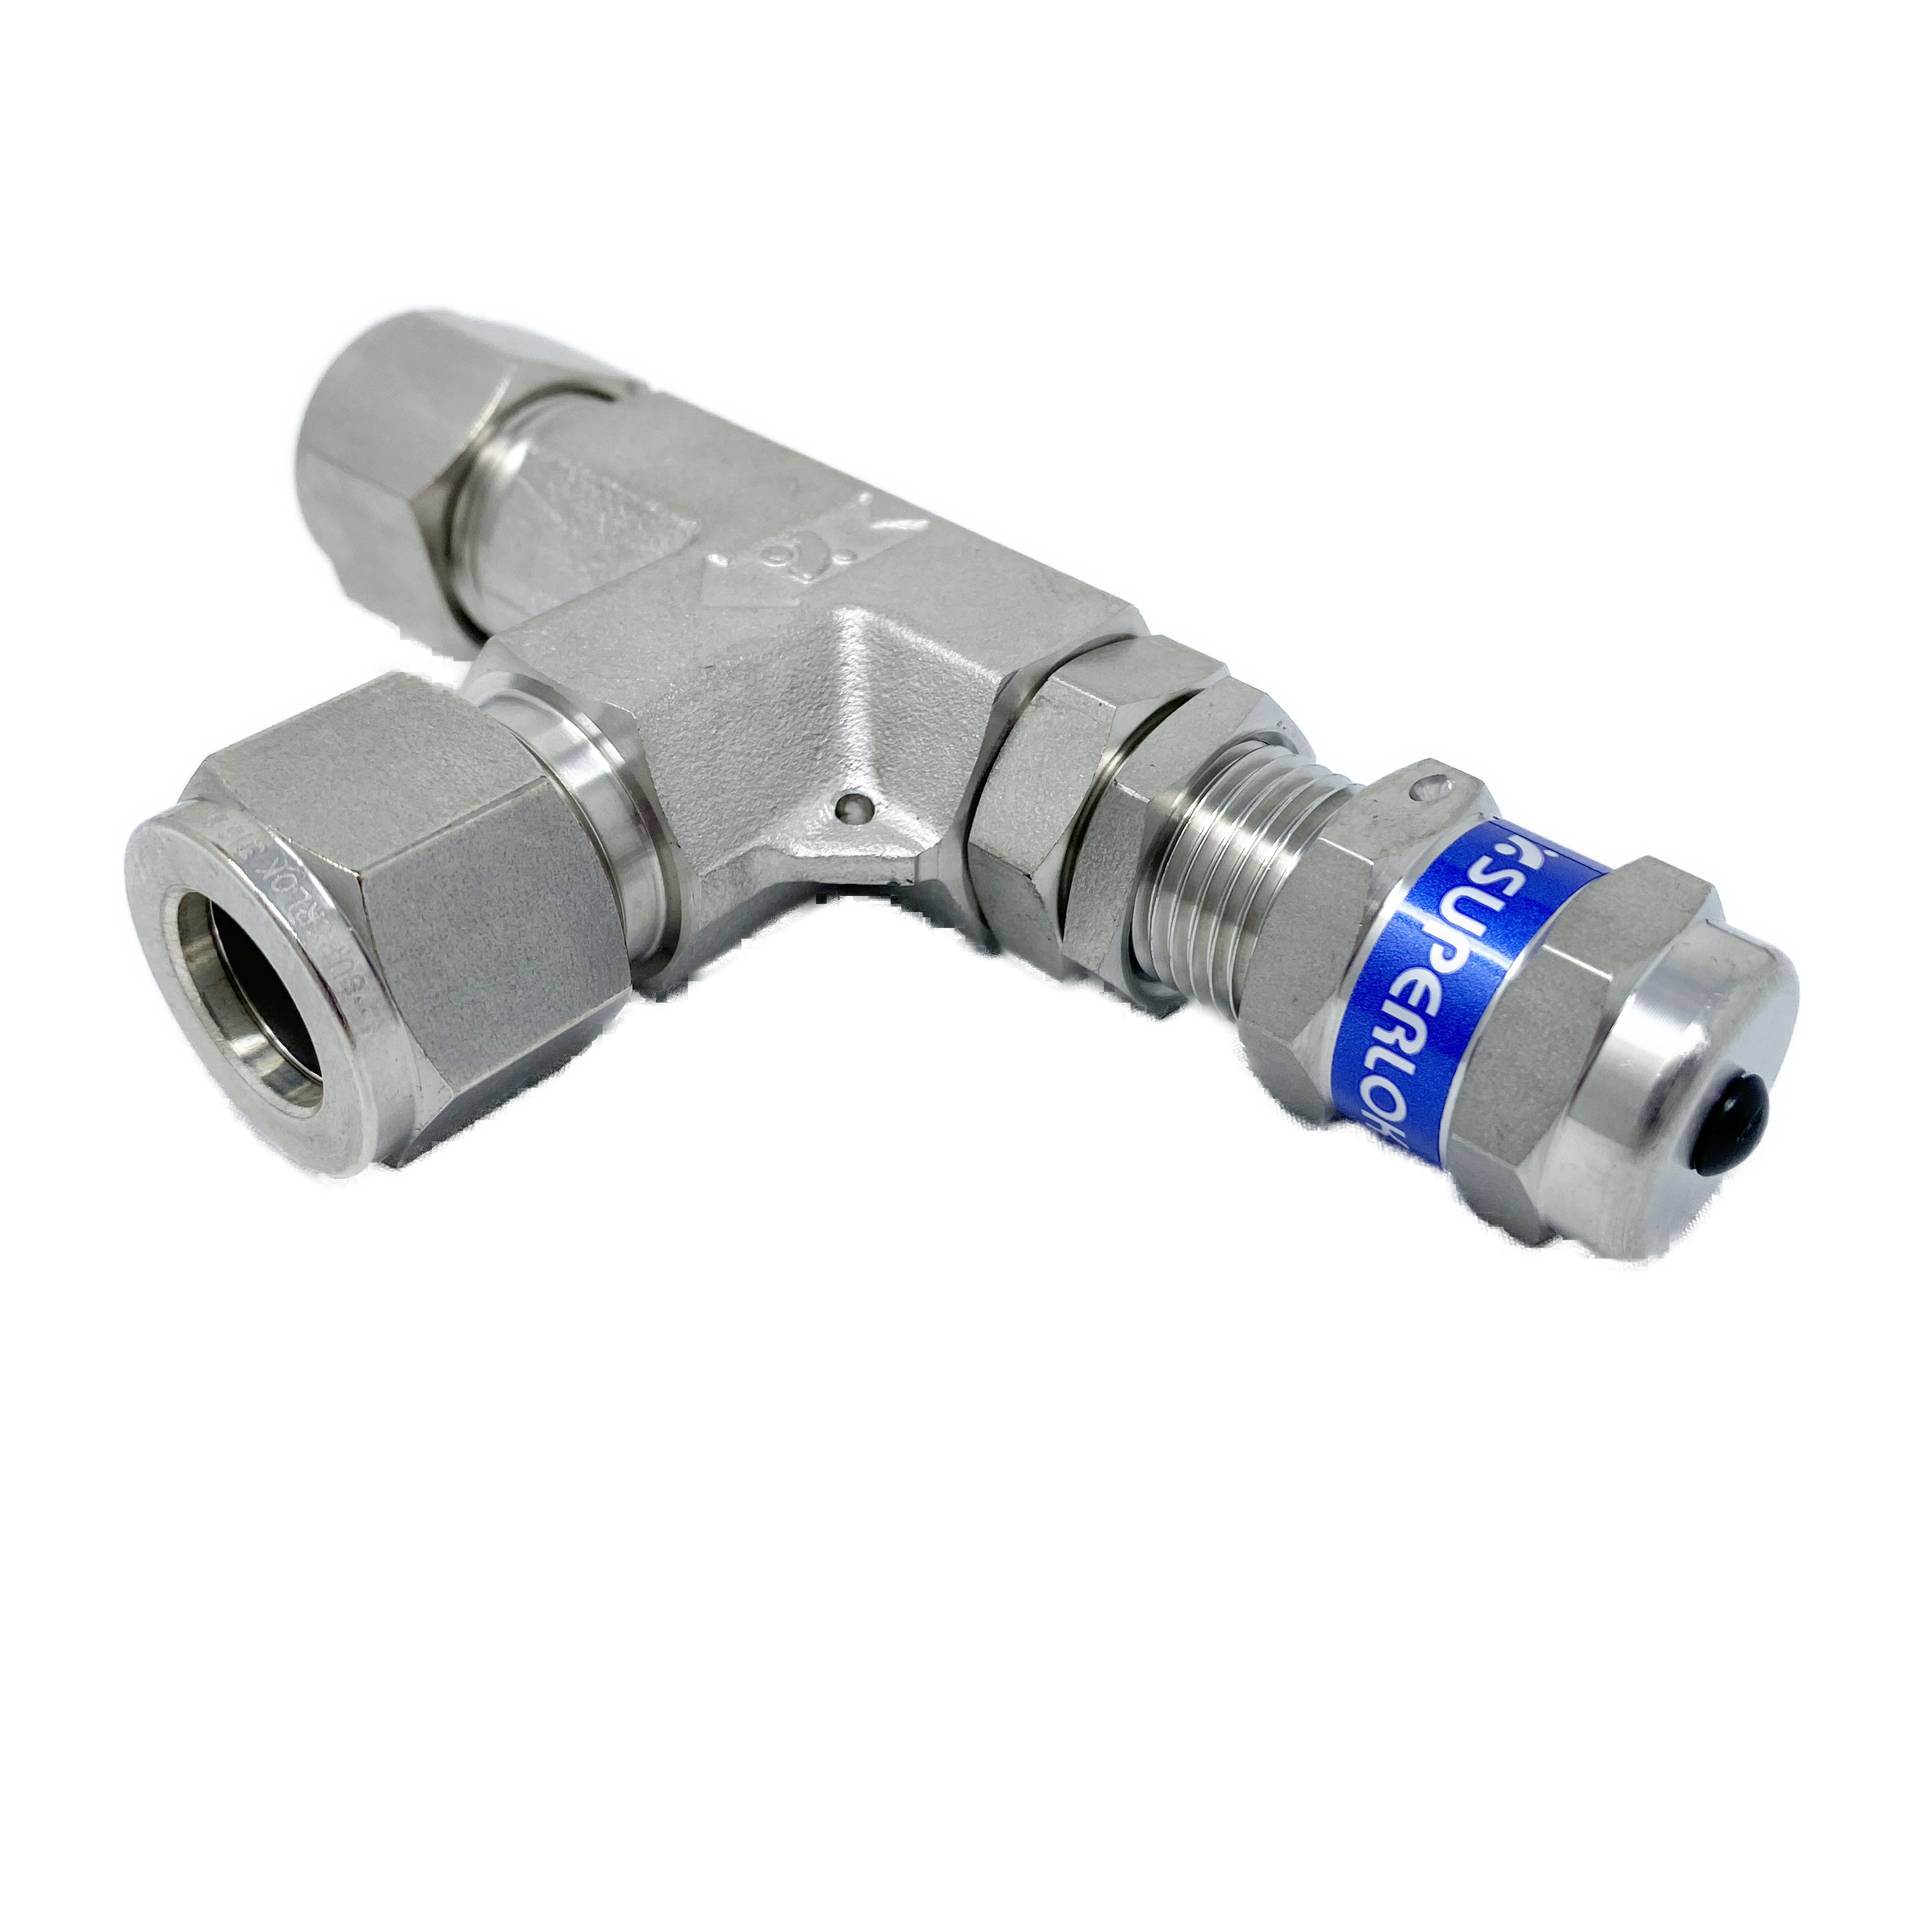 SRVL-S-6 : Superlok Inline Relief Valve, 3/8" O.D. Tube, Angle Pattern, Low Pressure, 300psi, 316SS, No Spring